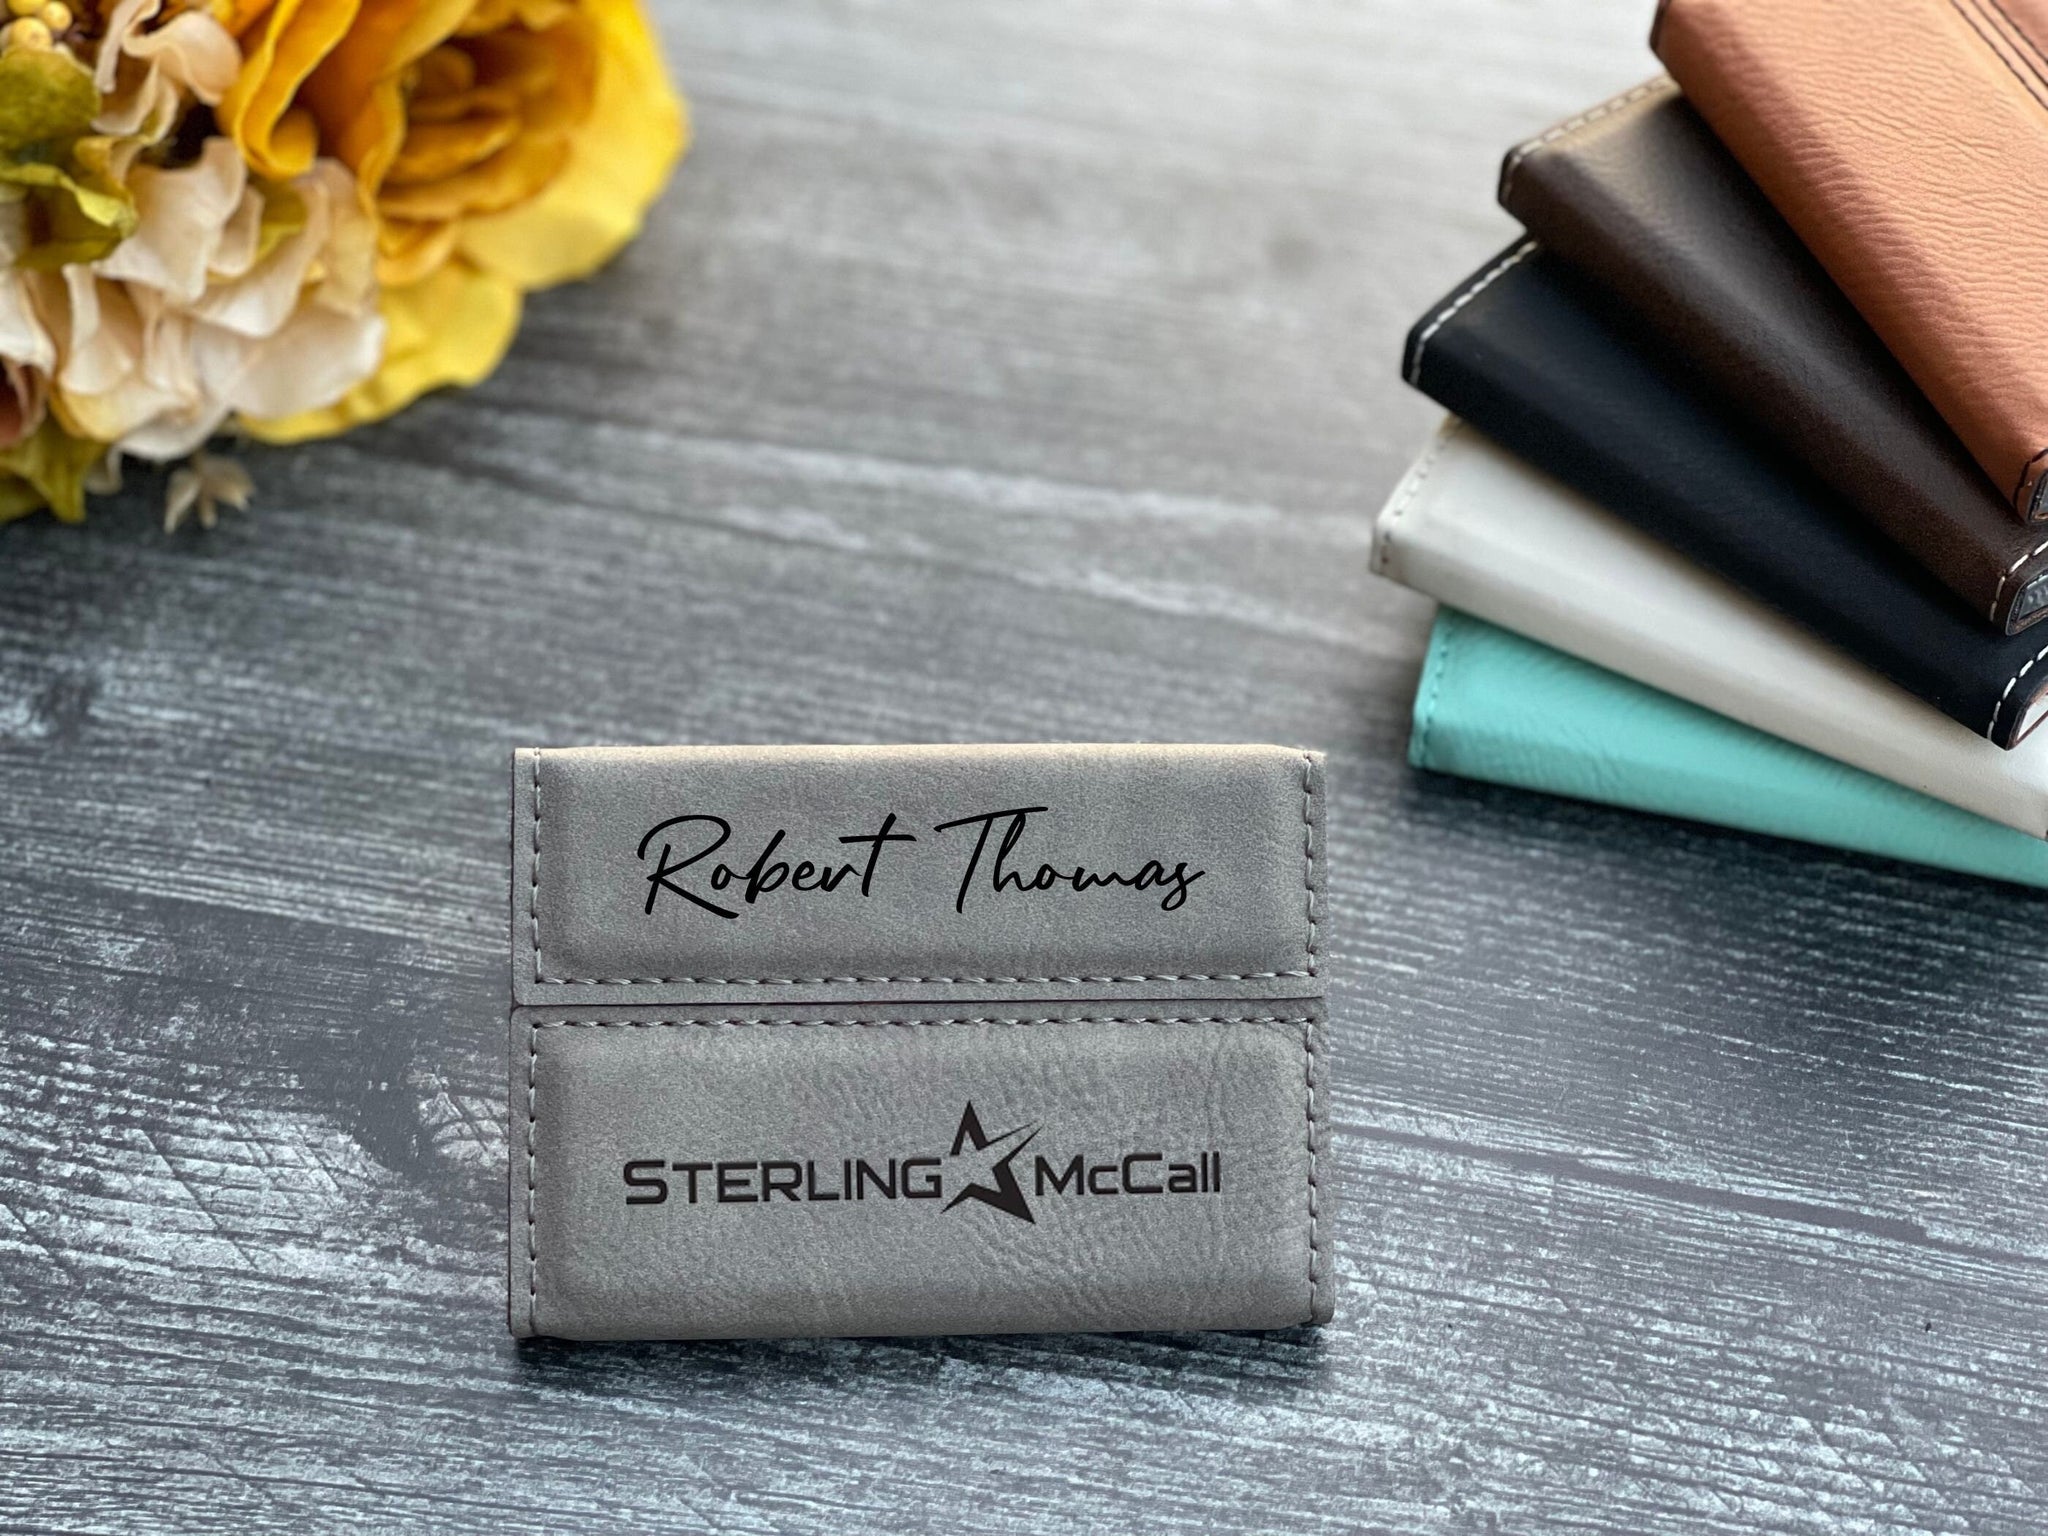 New Employee Gift, Personalized Card Case, Custom Engraved Boss Gift, Business Card Holder, Corporate Gift